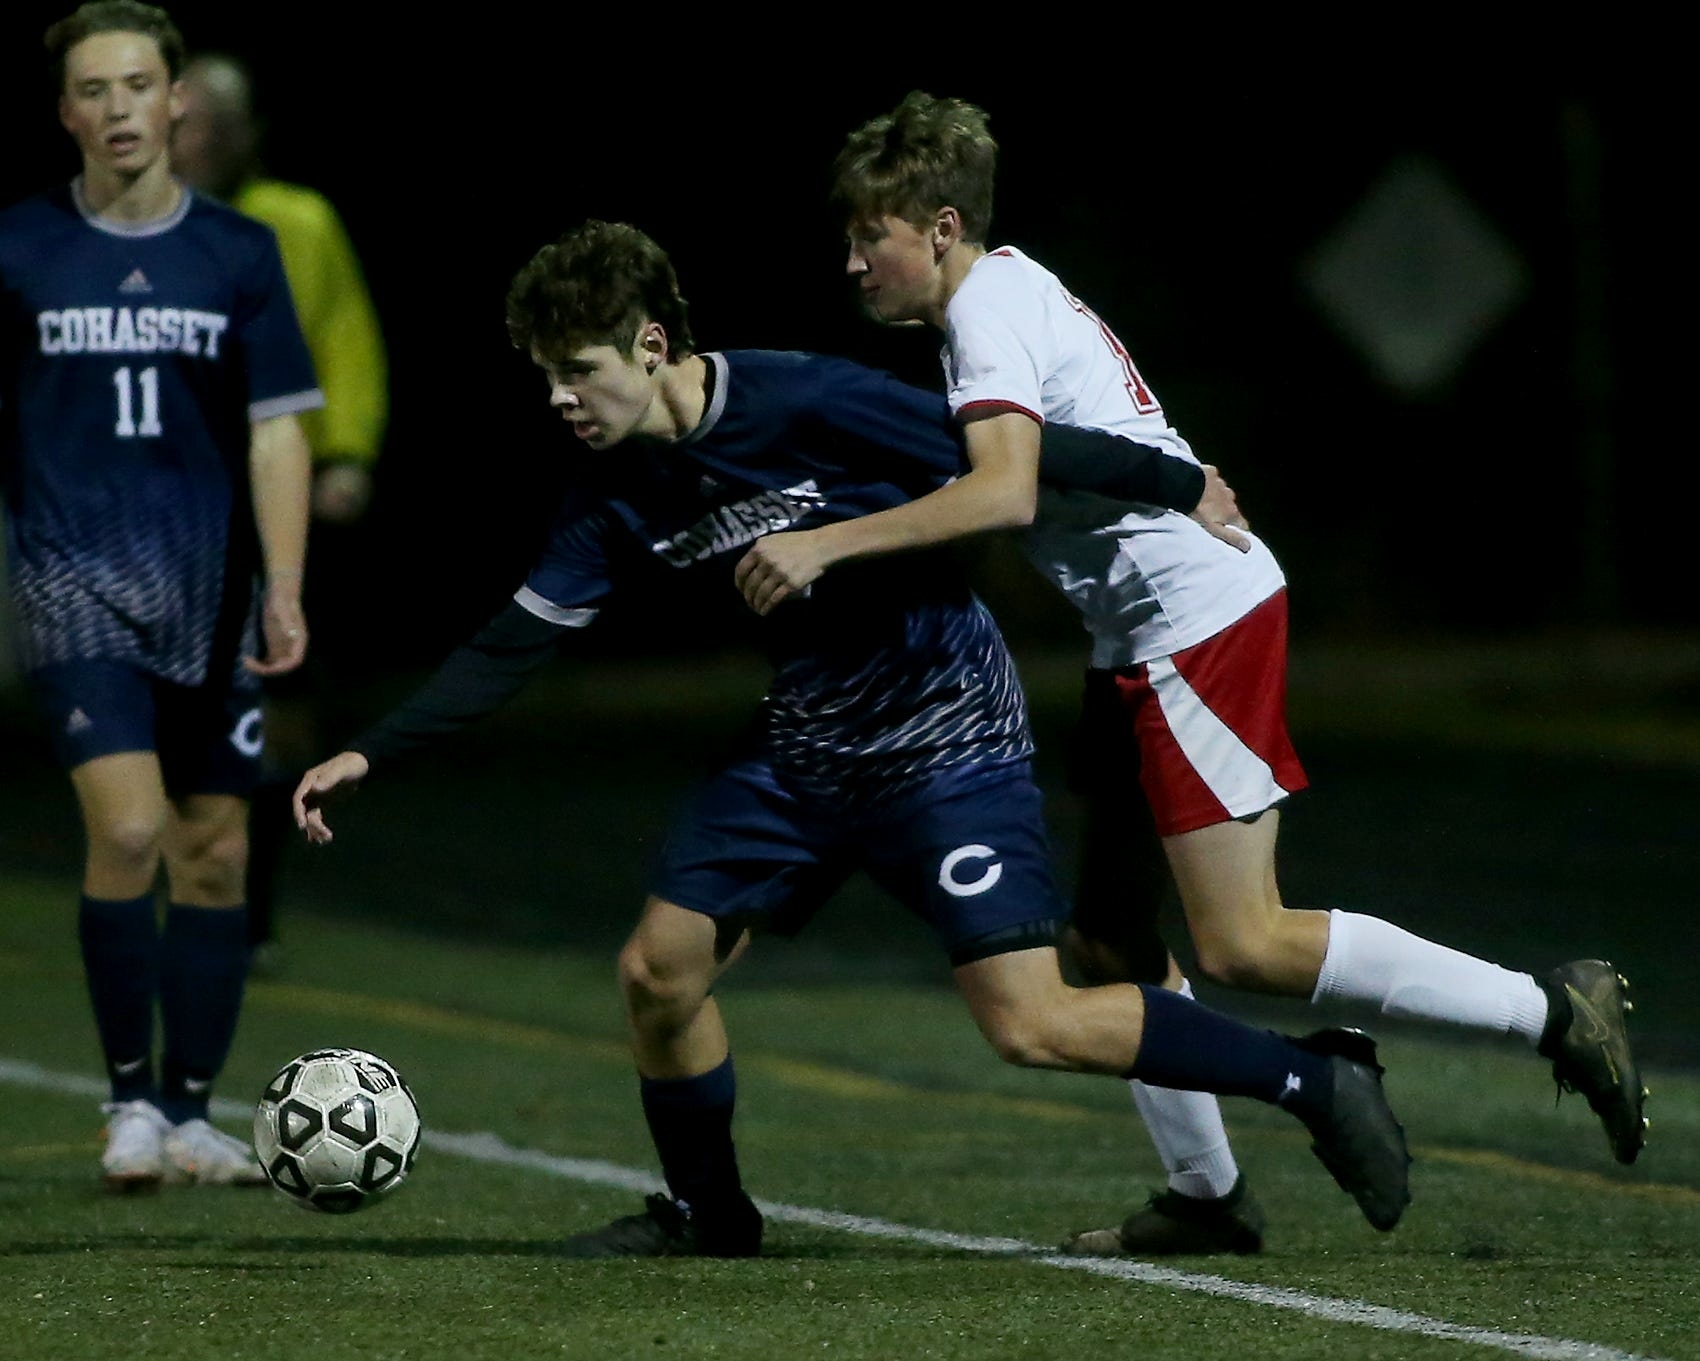 Fall Sports 2022: Cohasset boys soccer is working to replace 14 seniors